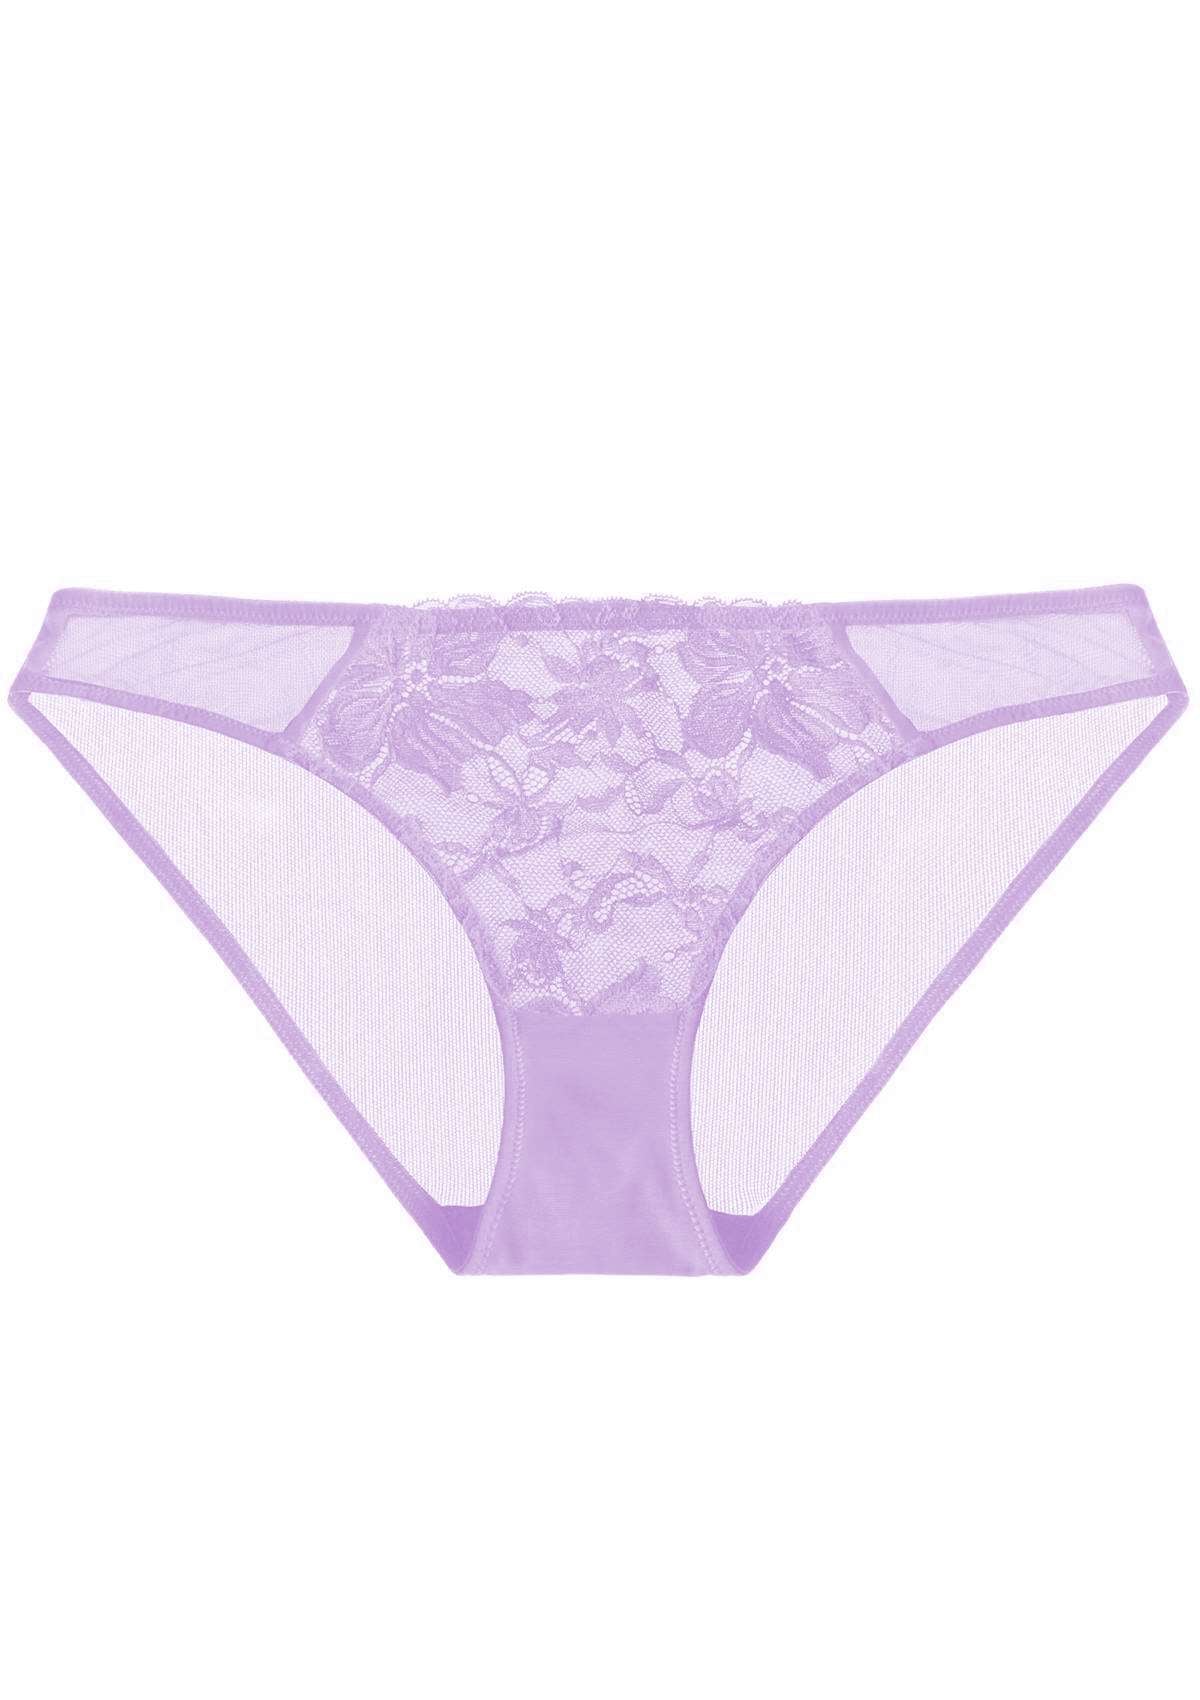 HSIA Mid-Rise Delicate Lace Sheer Underwear, Breathable And Comfortable - S / Purple